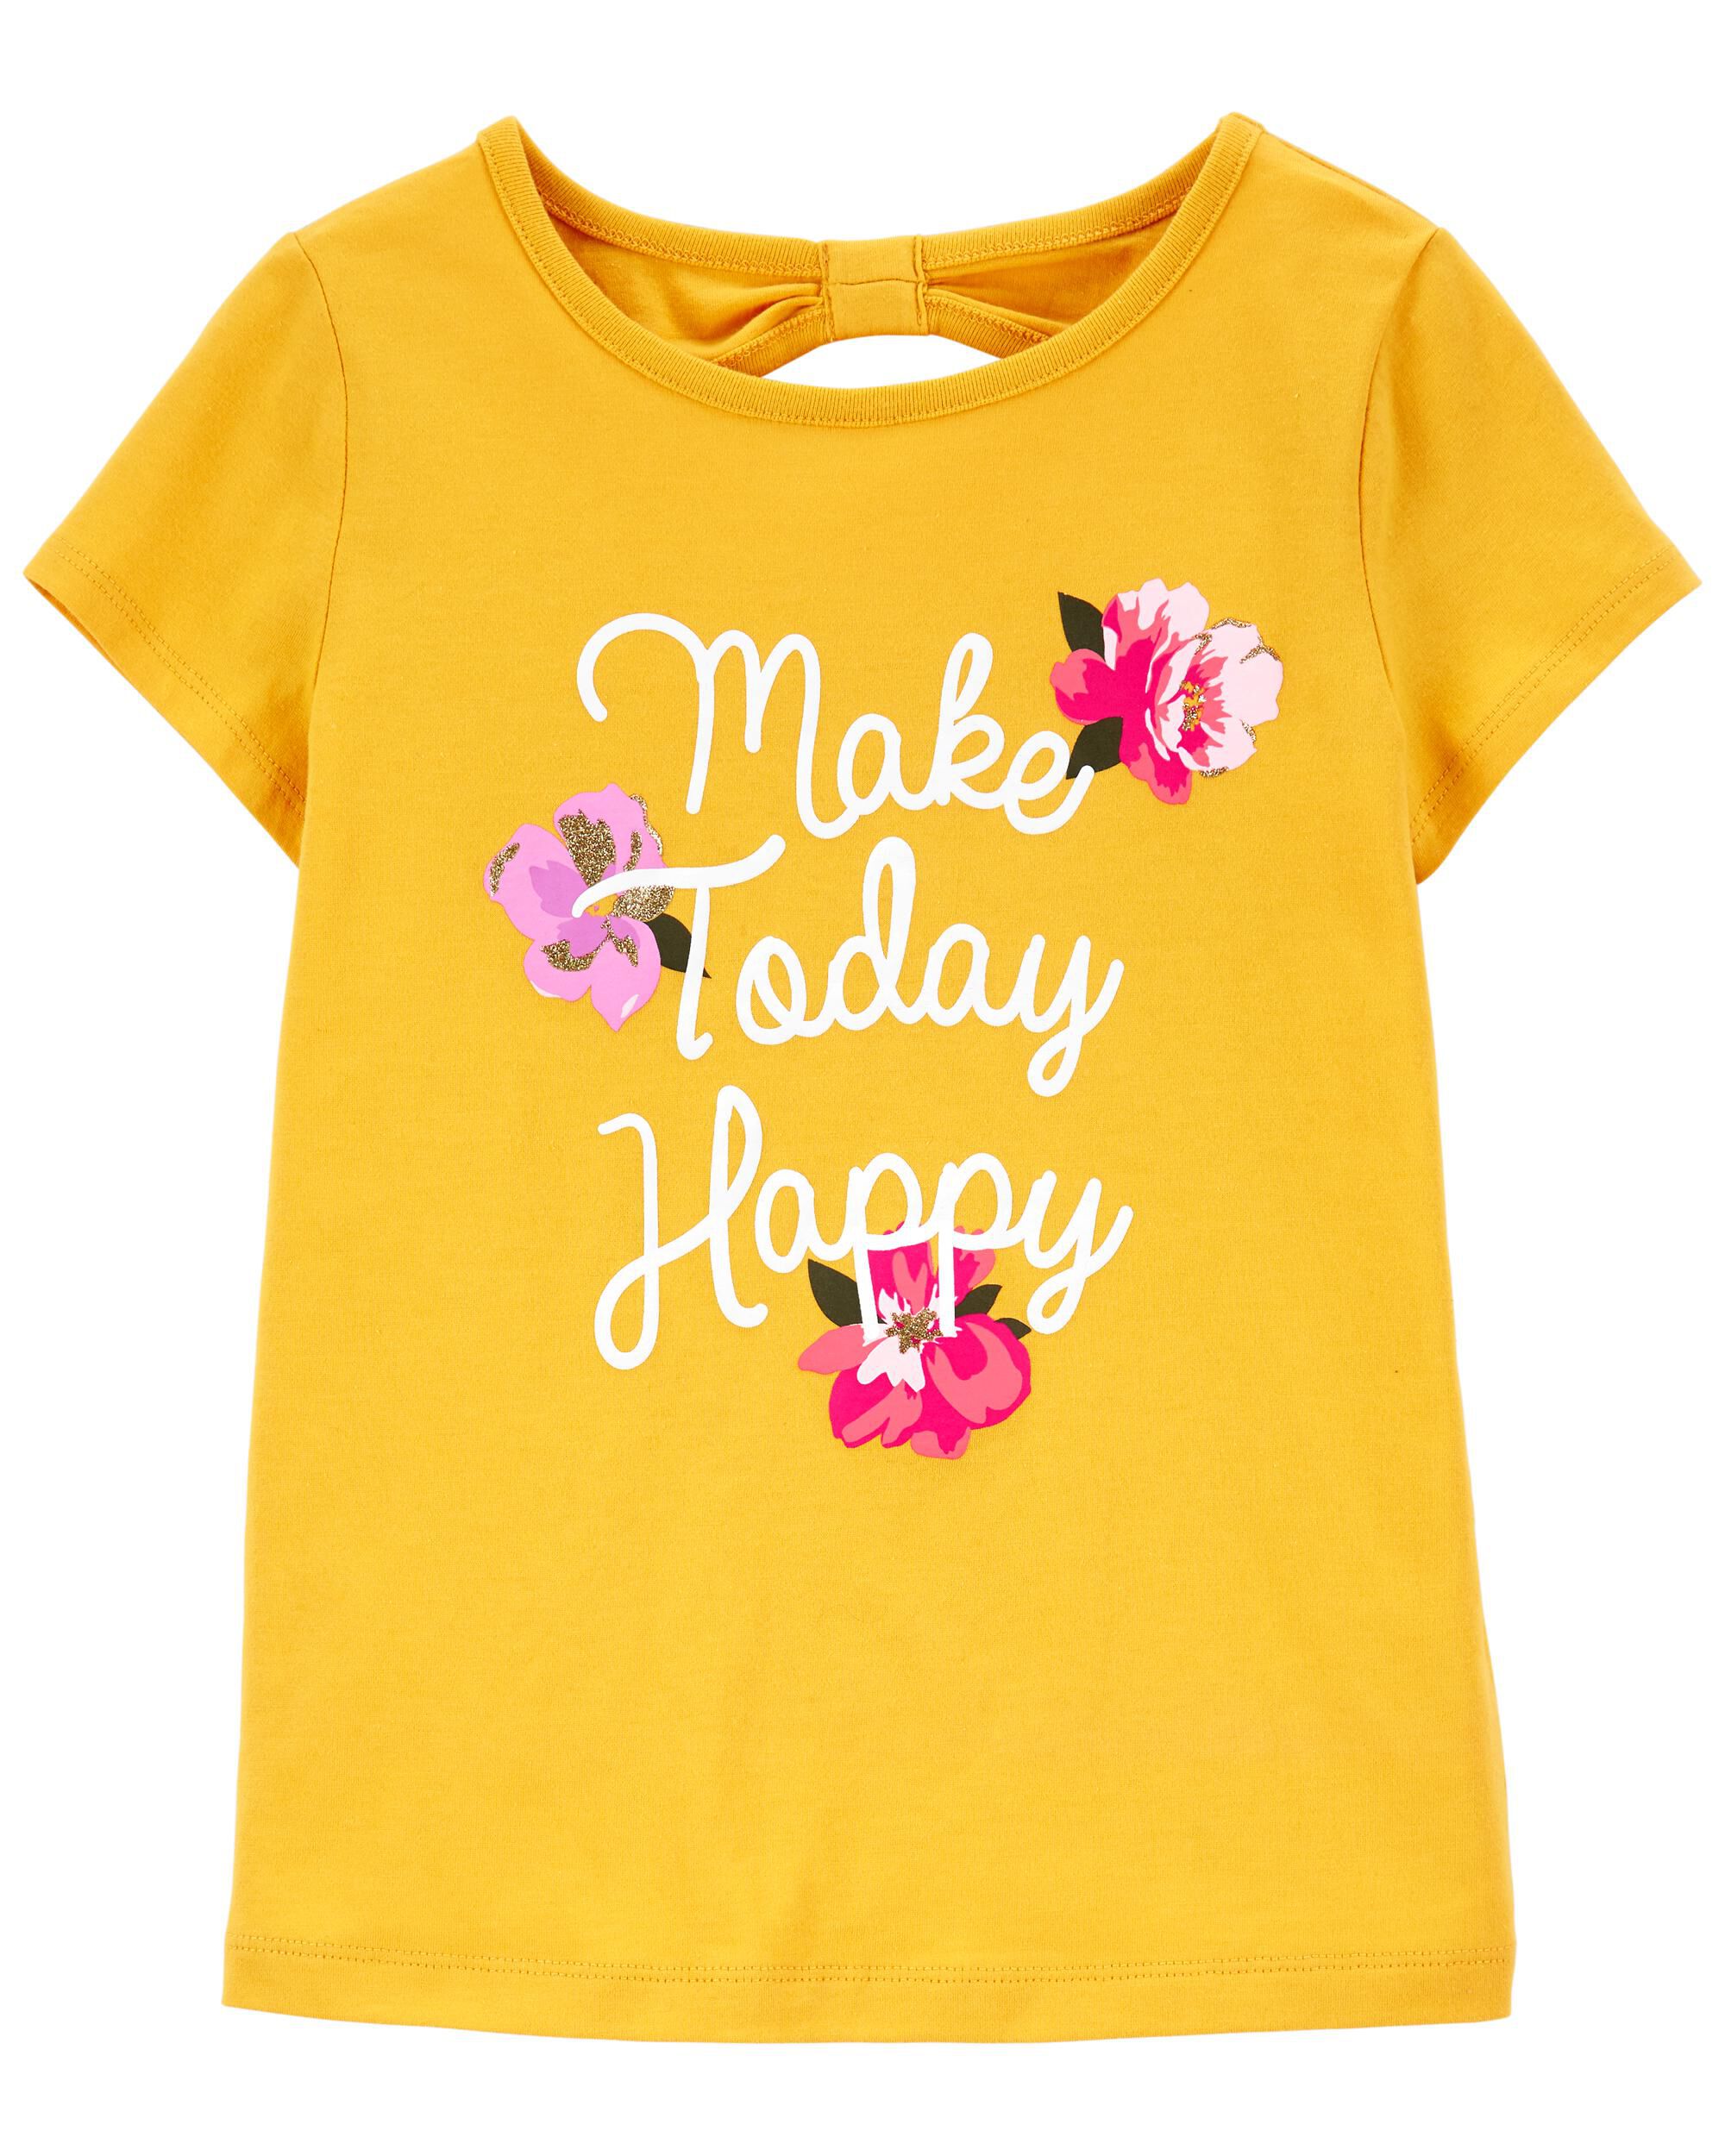  *CLEARANCE* Happy Jersey Tee 